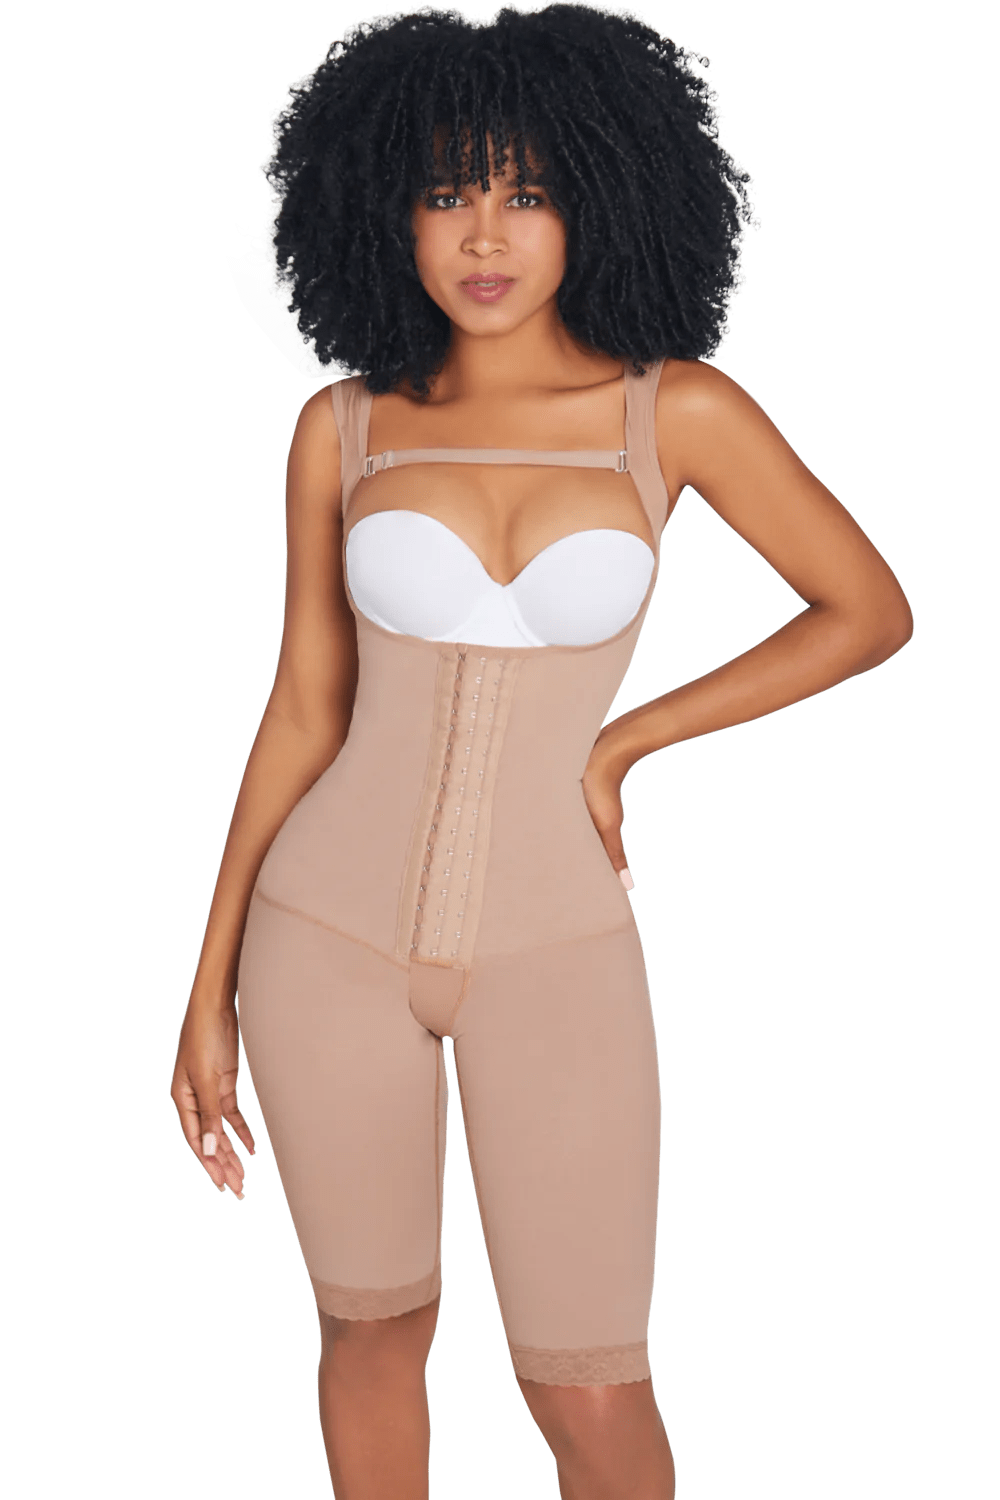 Ily Clothing Shapwear Long Body Shaper with Wide Straps